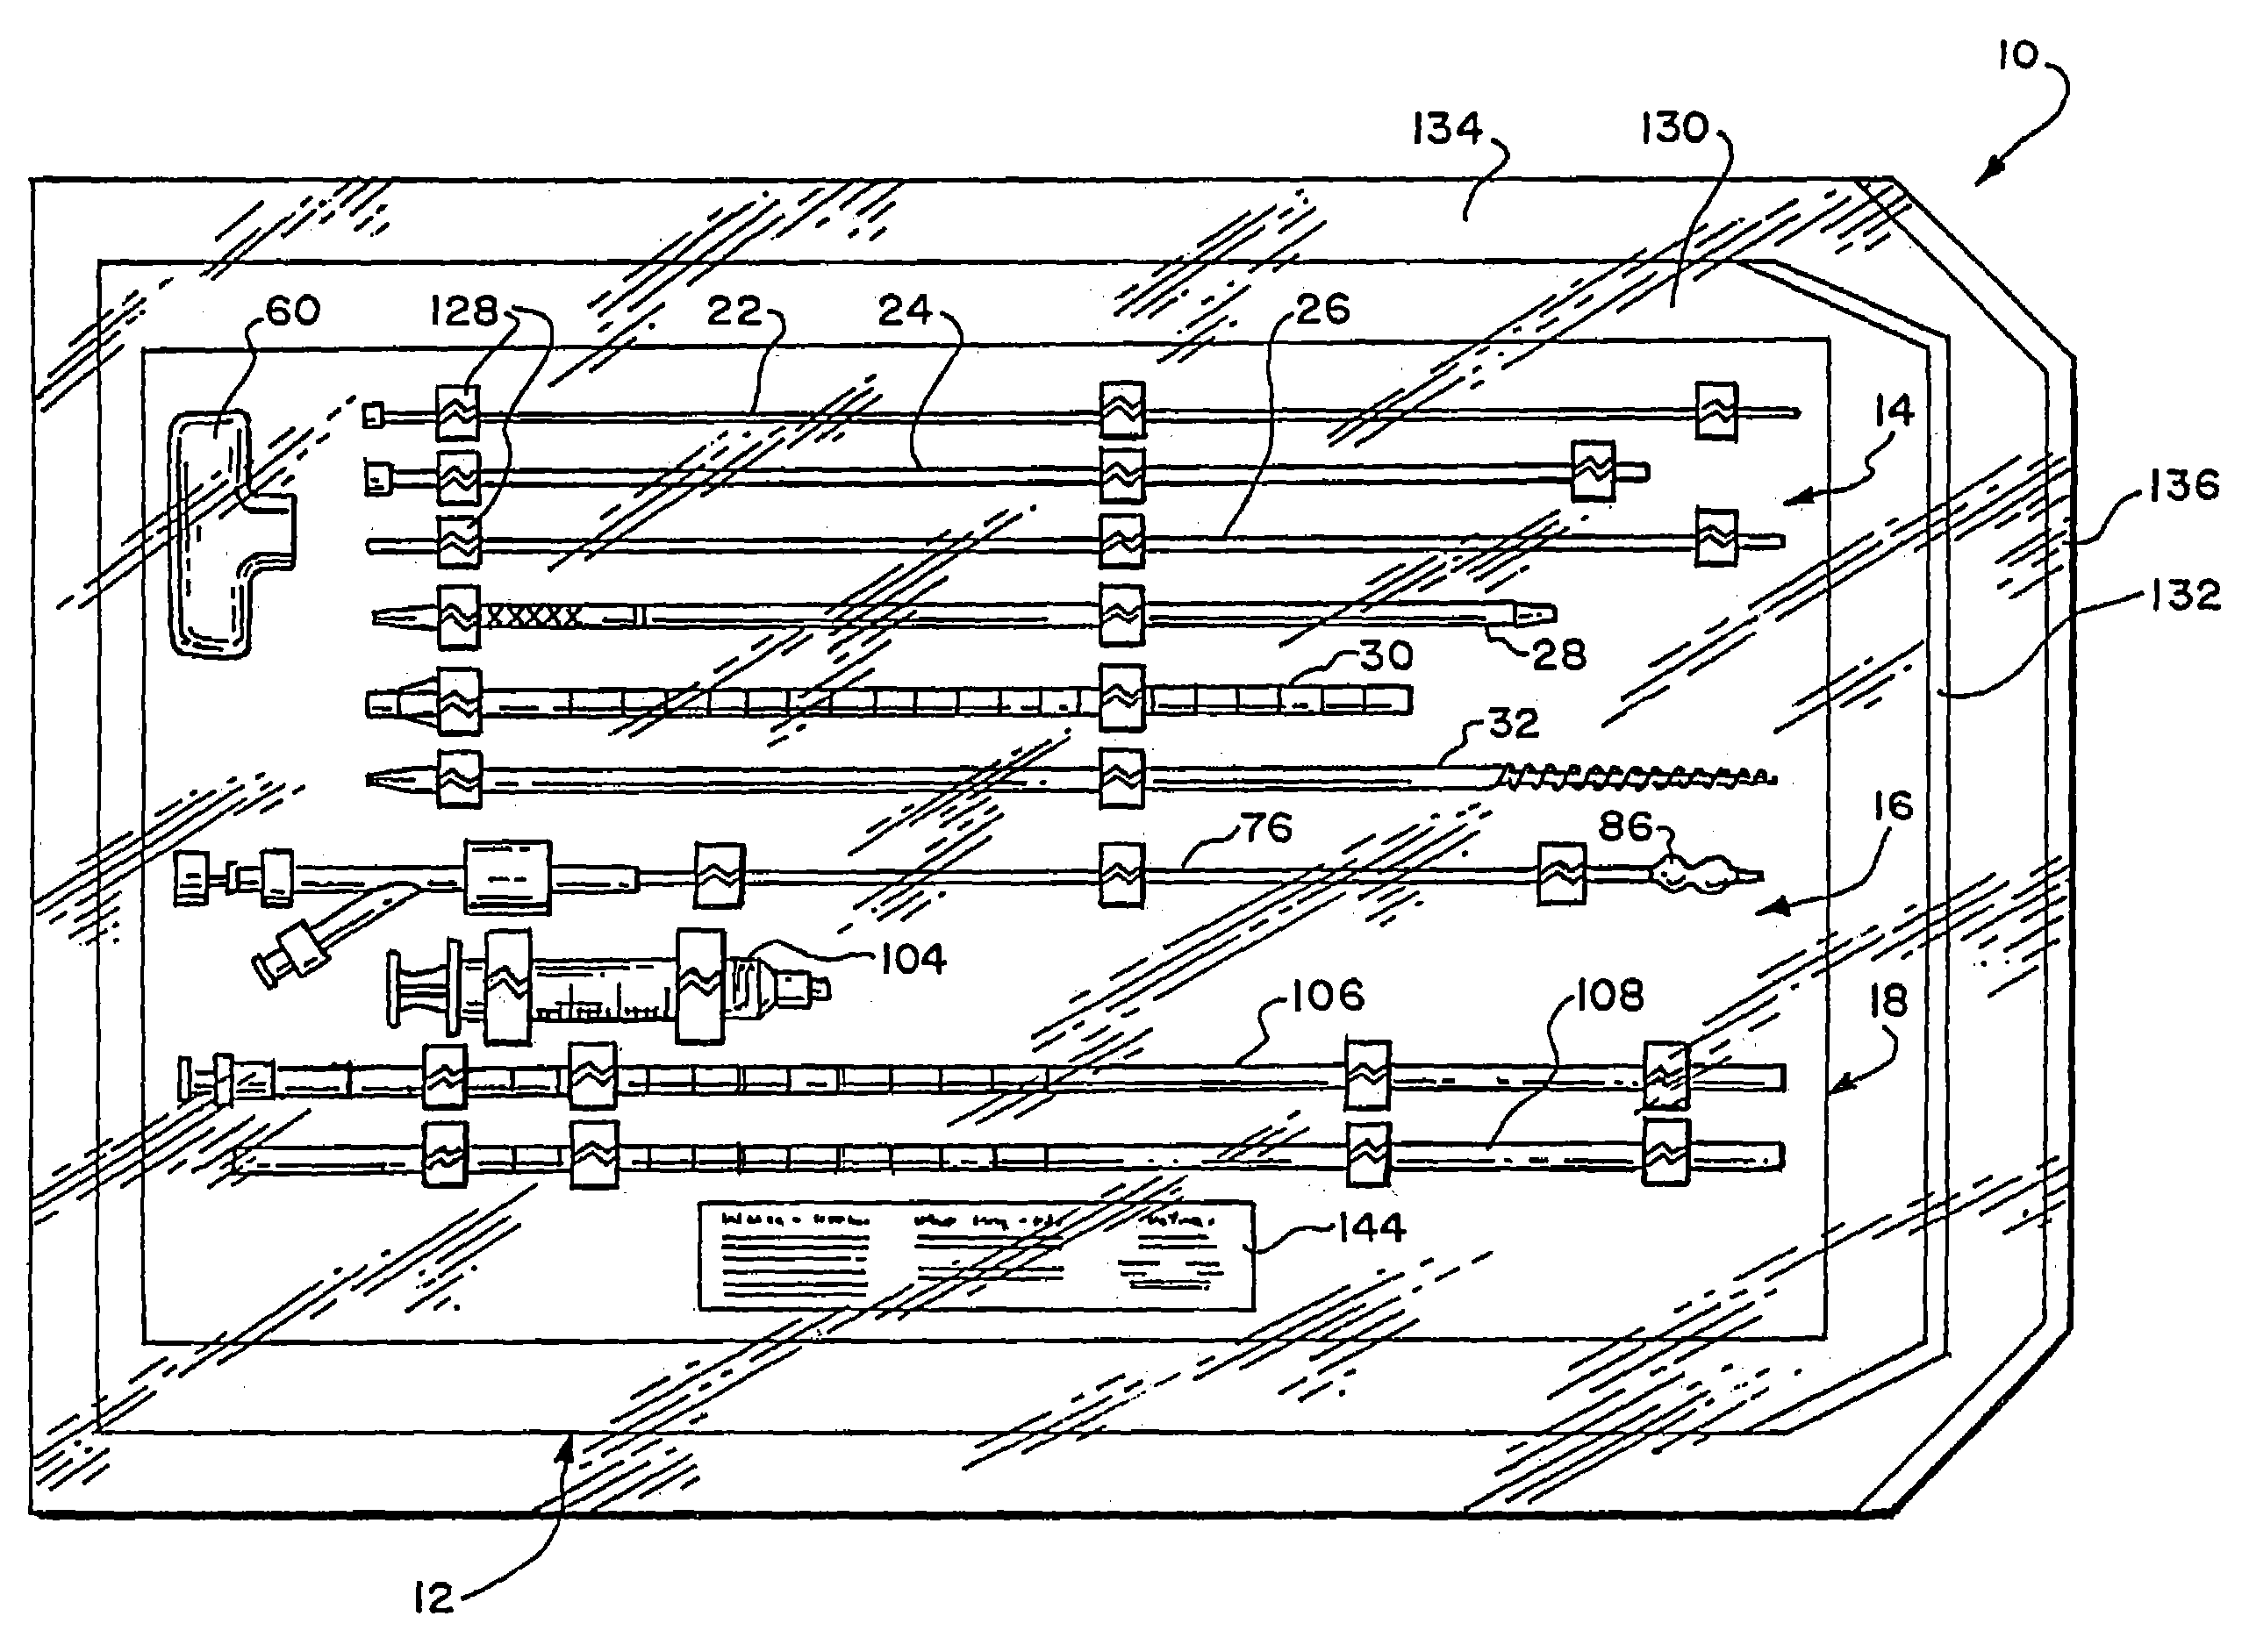 Systems and methods for placing materials into bone